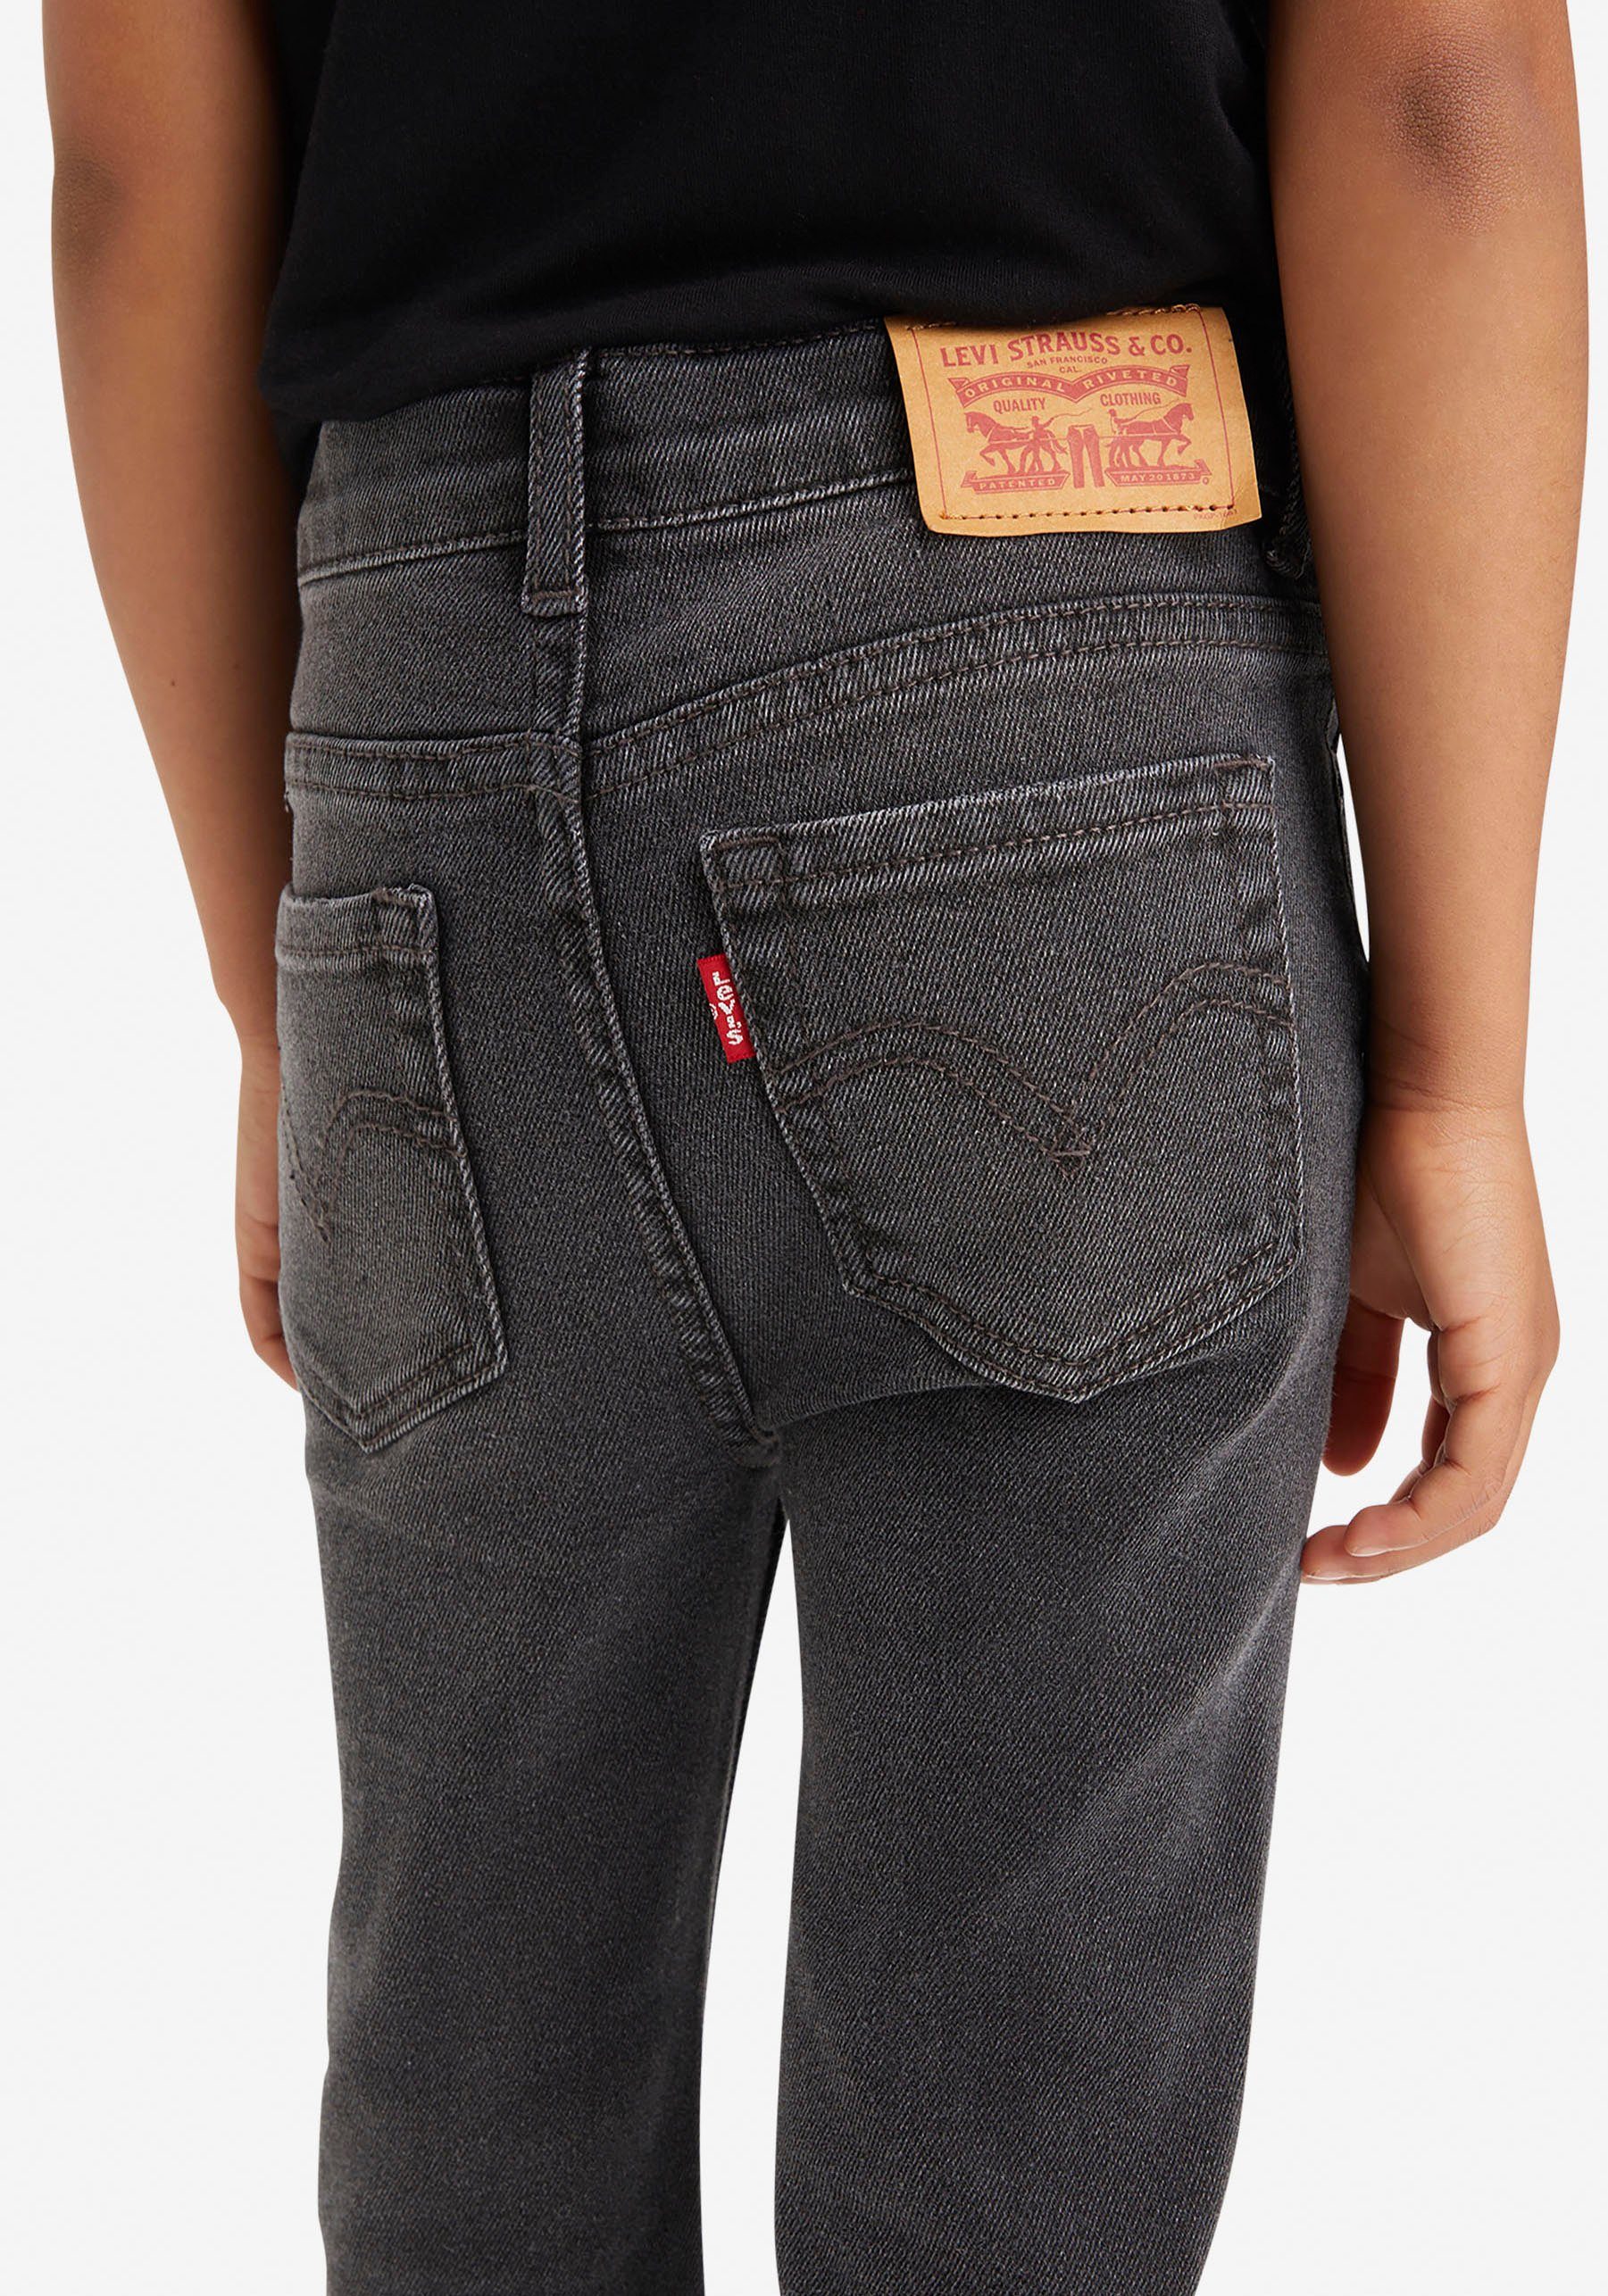 RISE 726 HIGH doozie for a Kids JEANS Levi's® Bootcut-Jeans GIRLS such